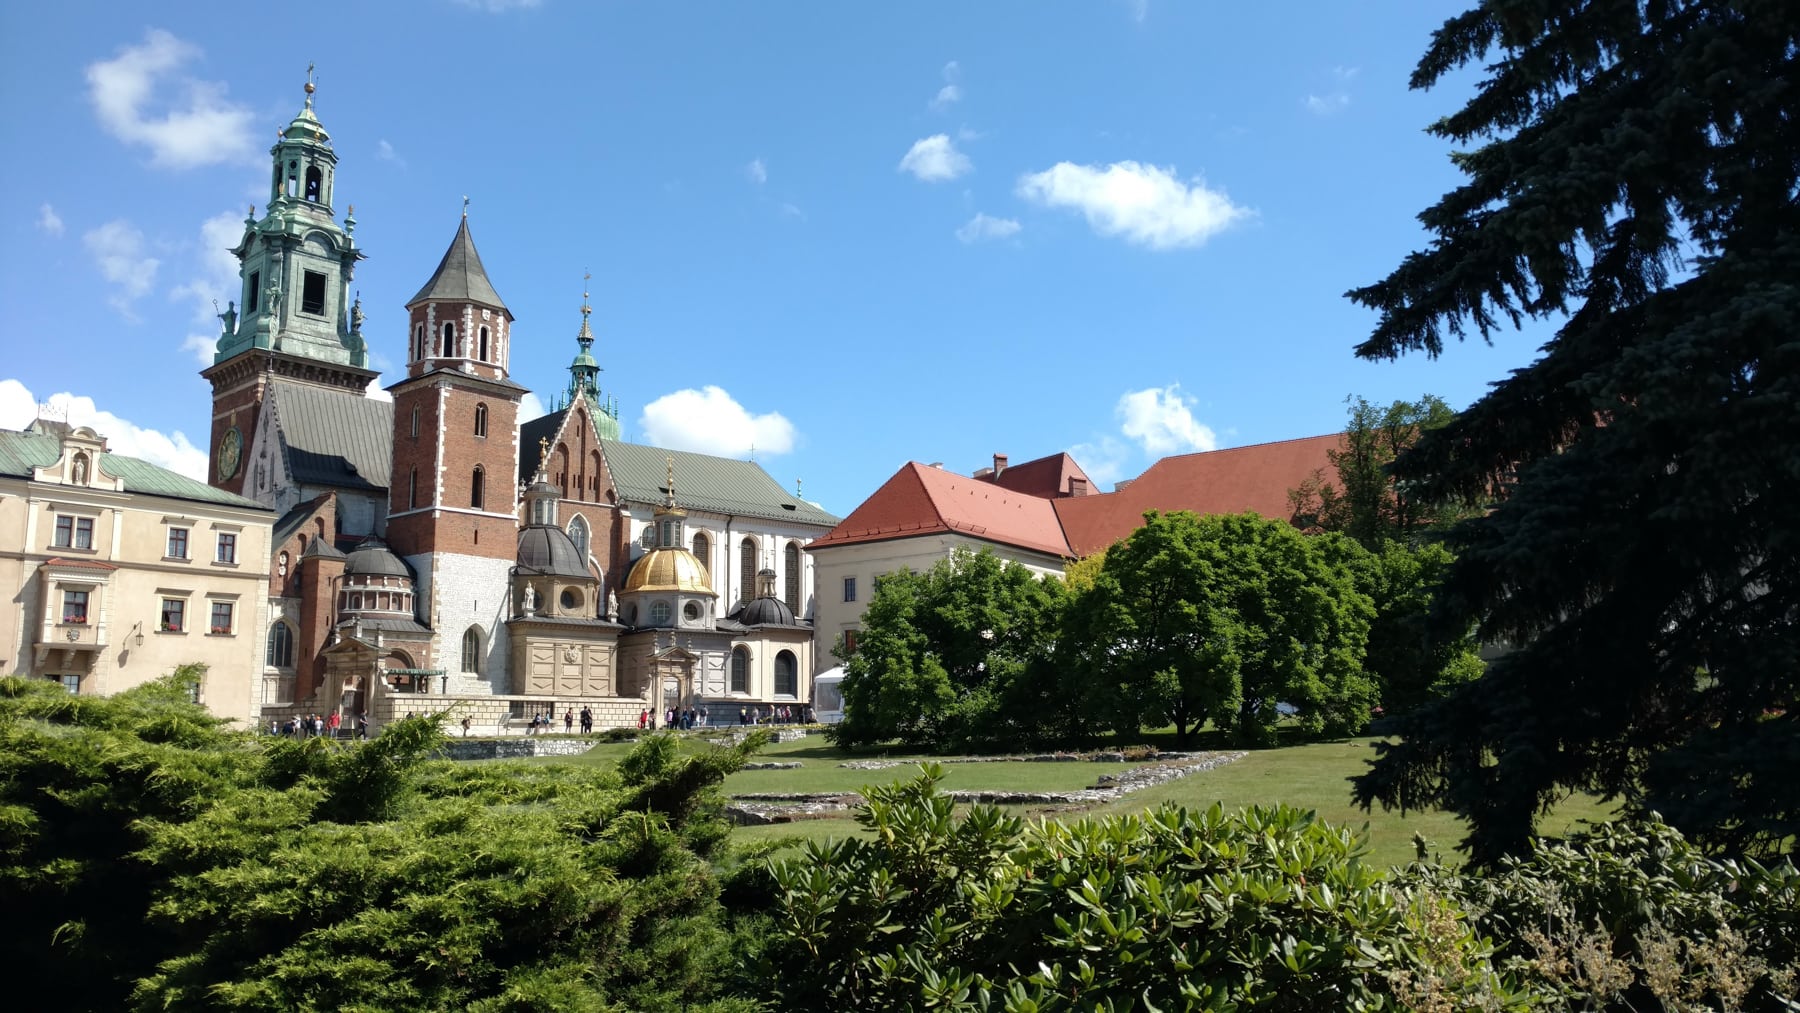 A view from inside the Wawel walls